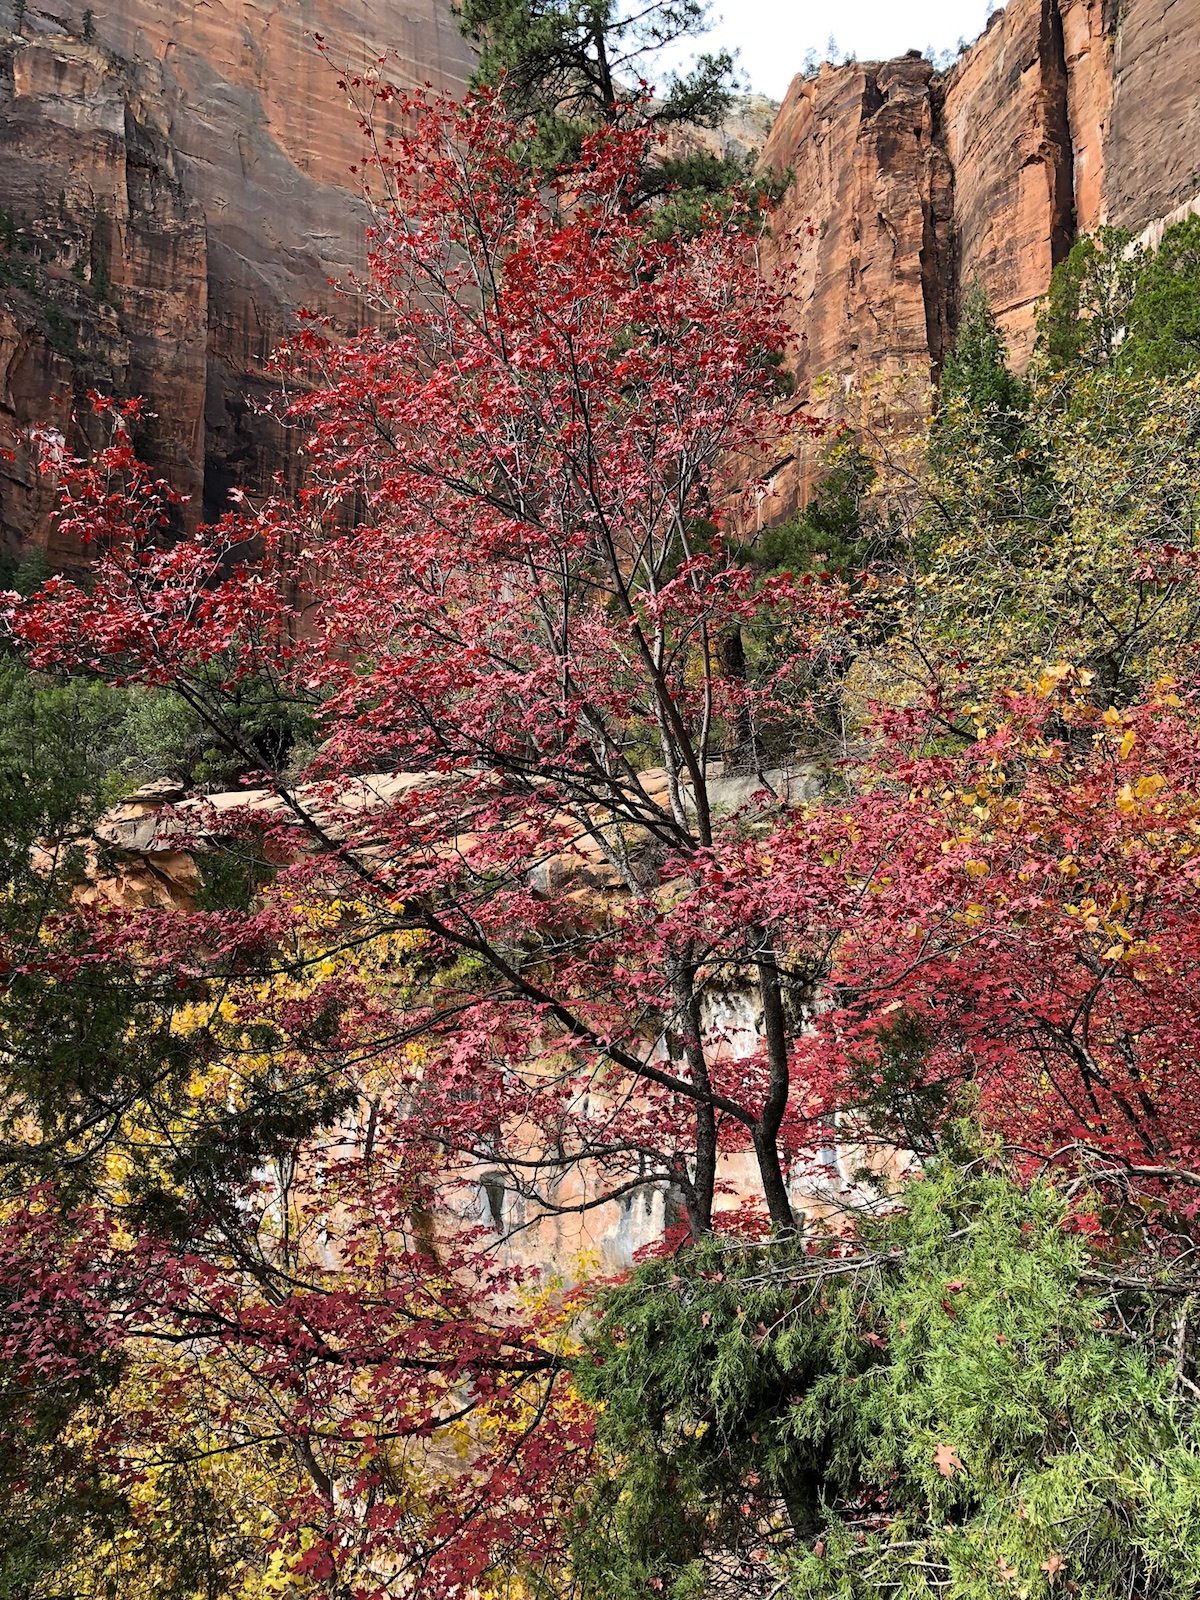 ZIon's coat of many colors